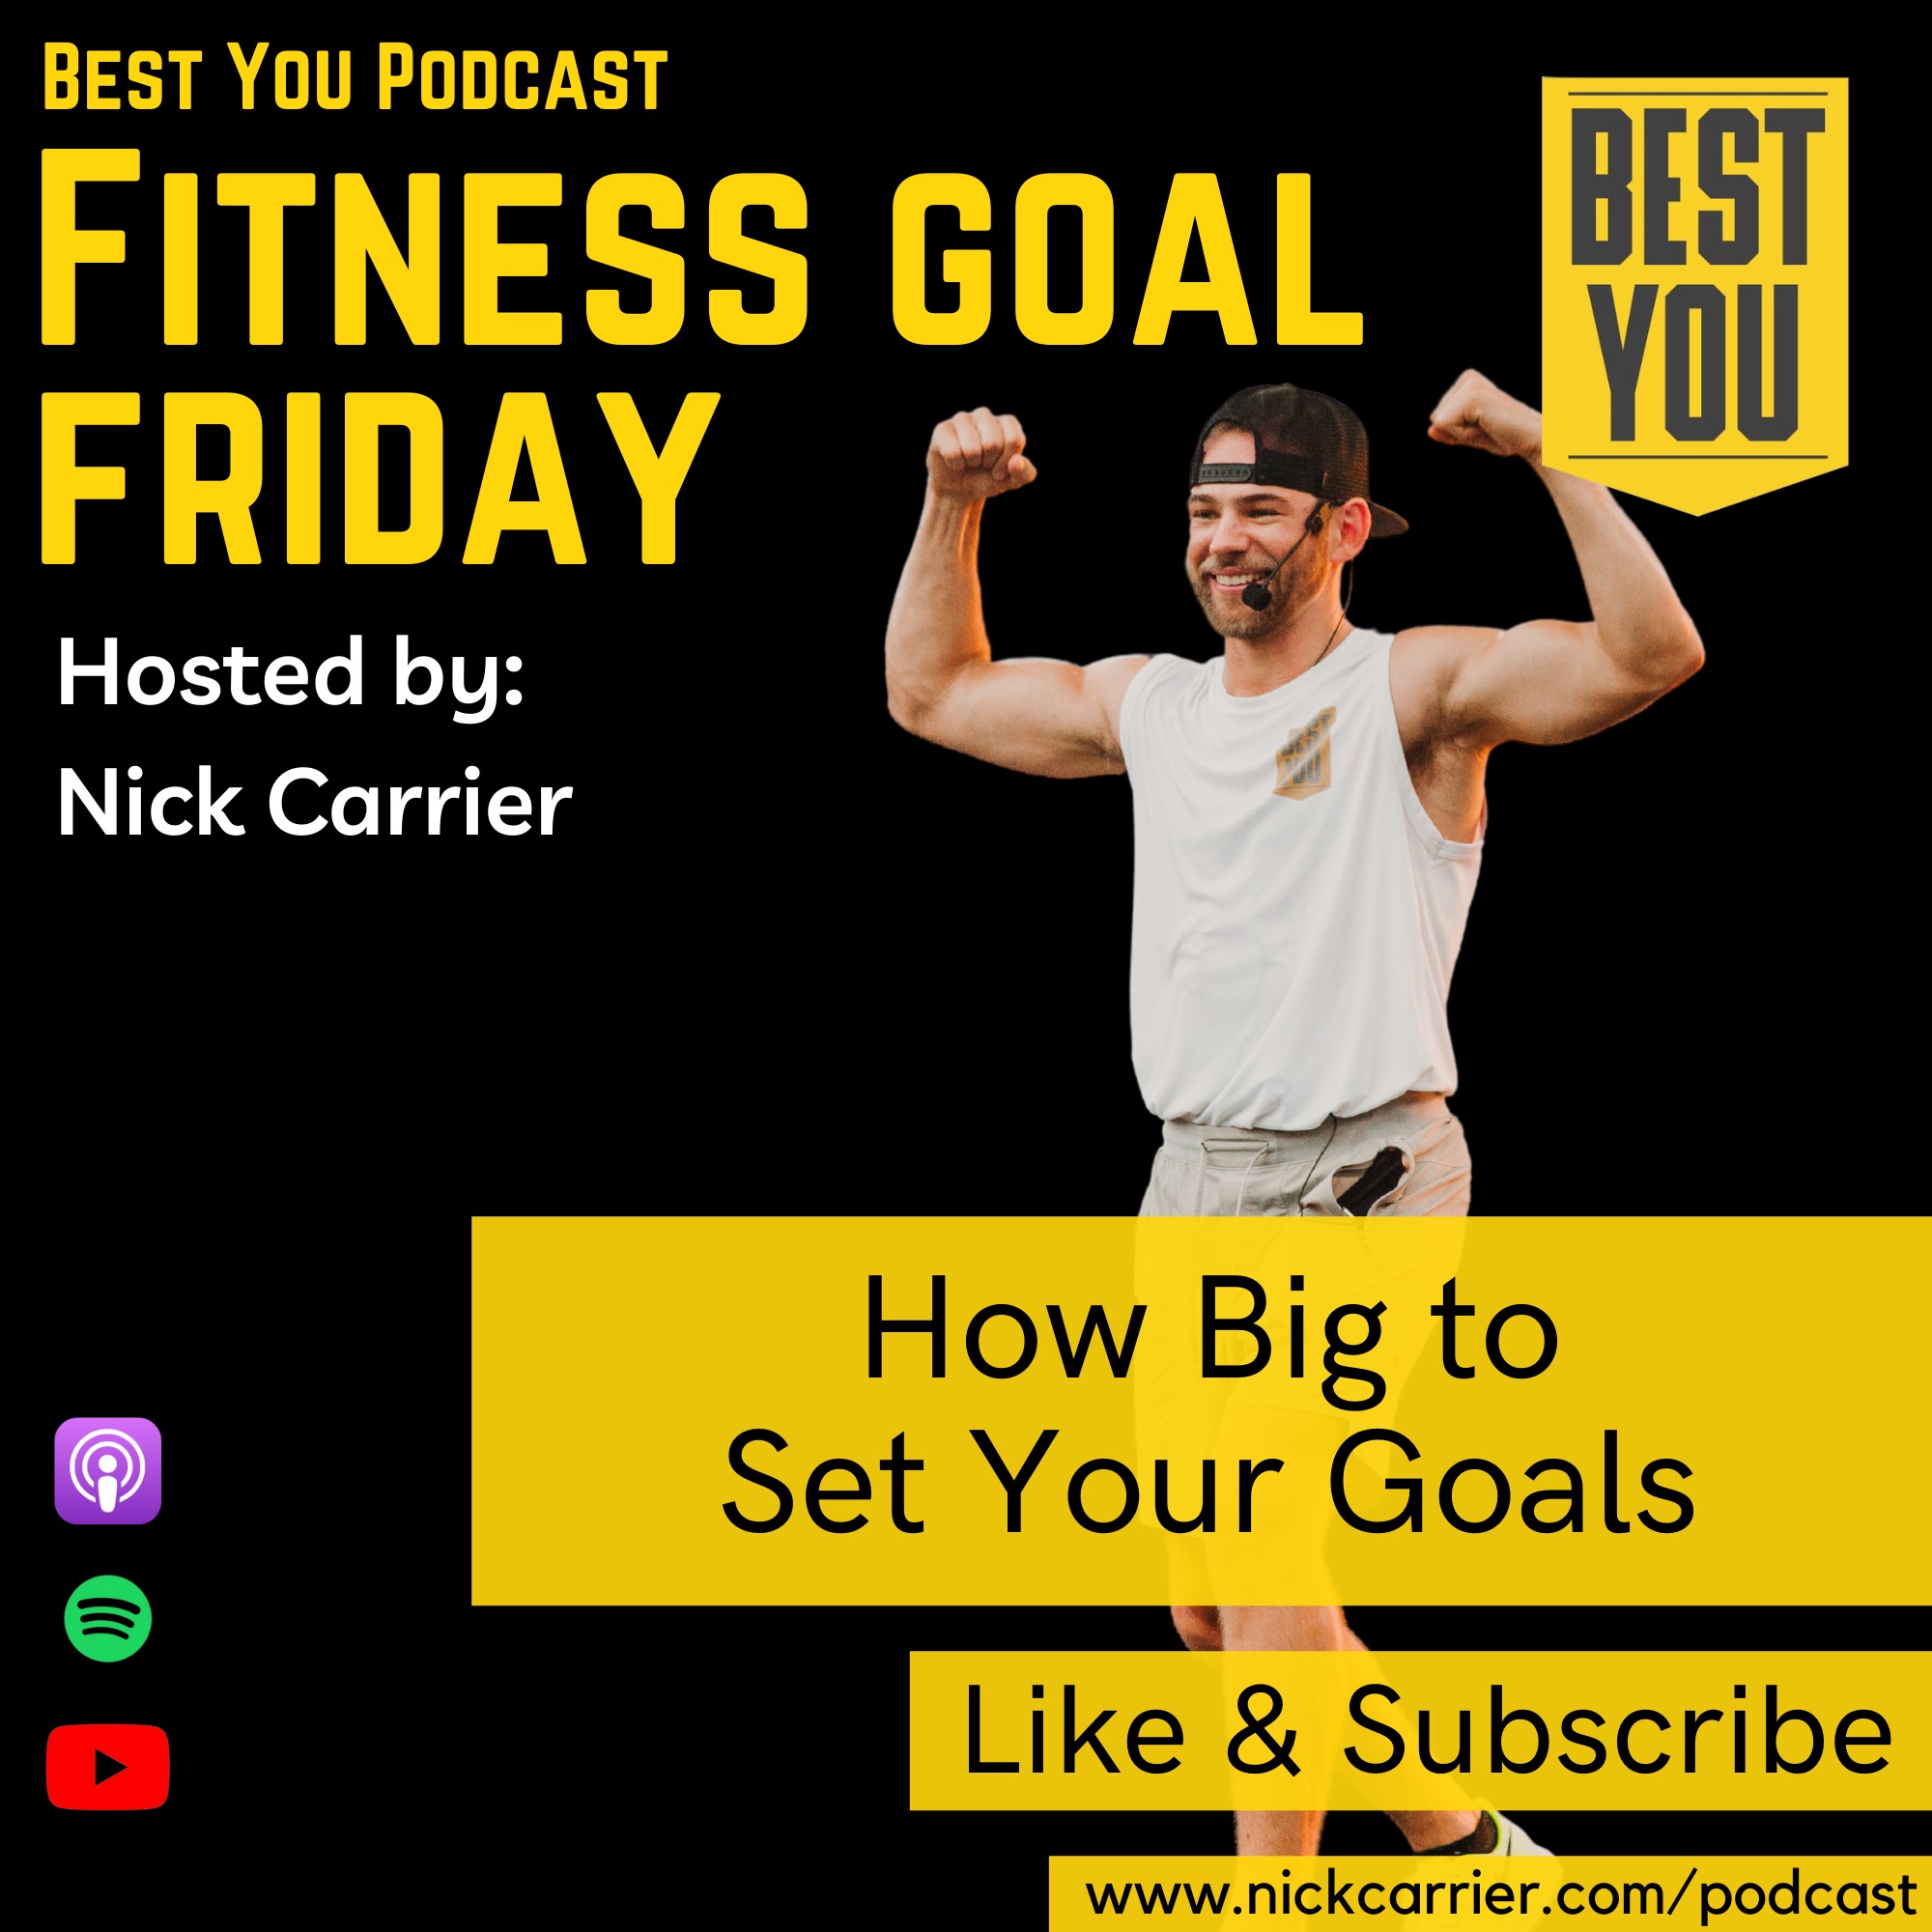 Fitness Goal Friday - How Big to Set Your Goals